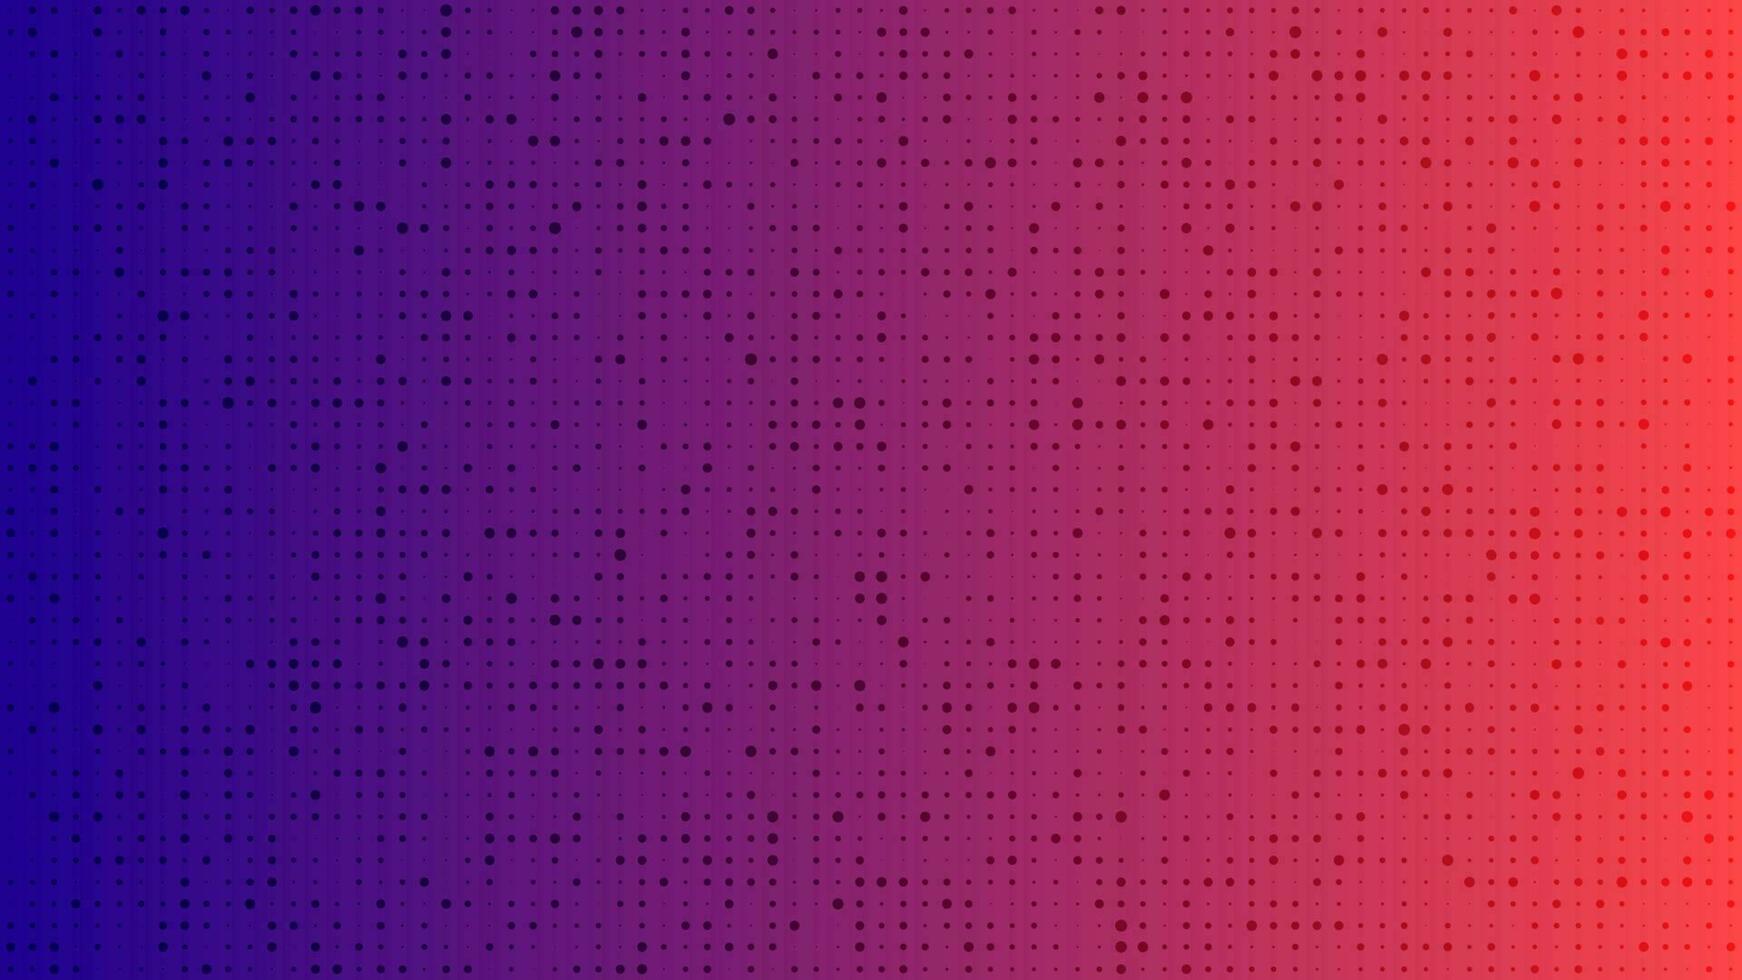 Abstract geometric gradient circles background. Red and blue dot background with empty space. Vector illustration.